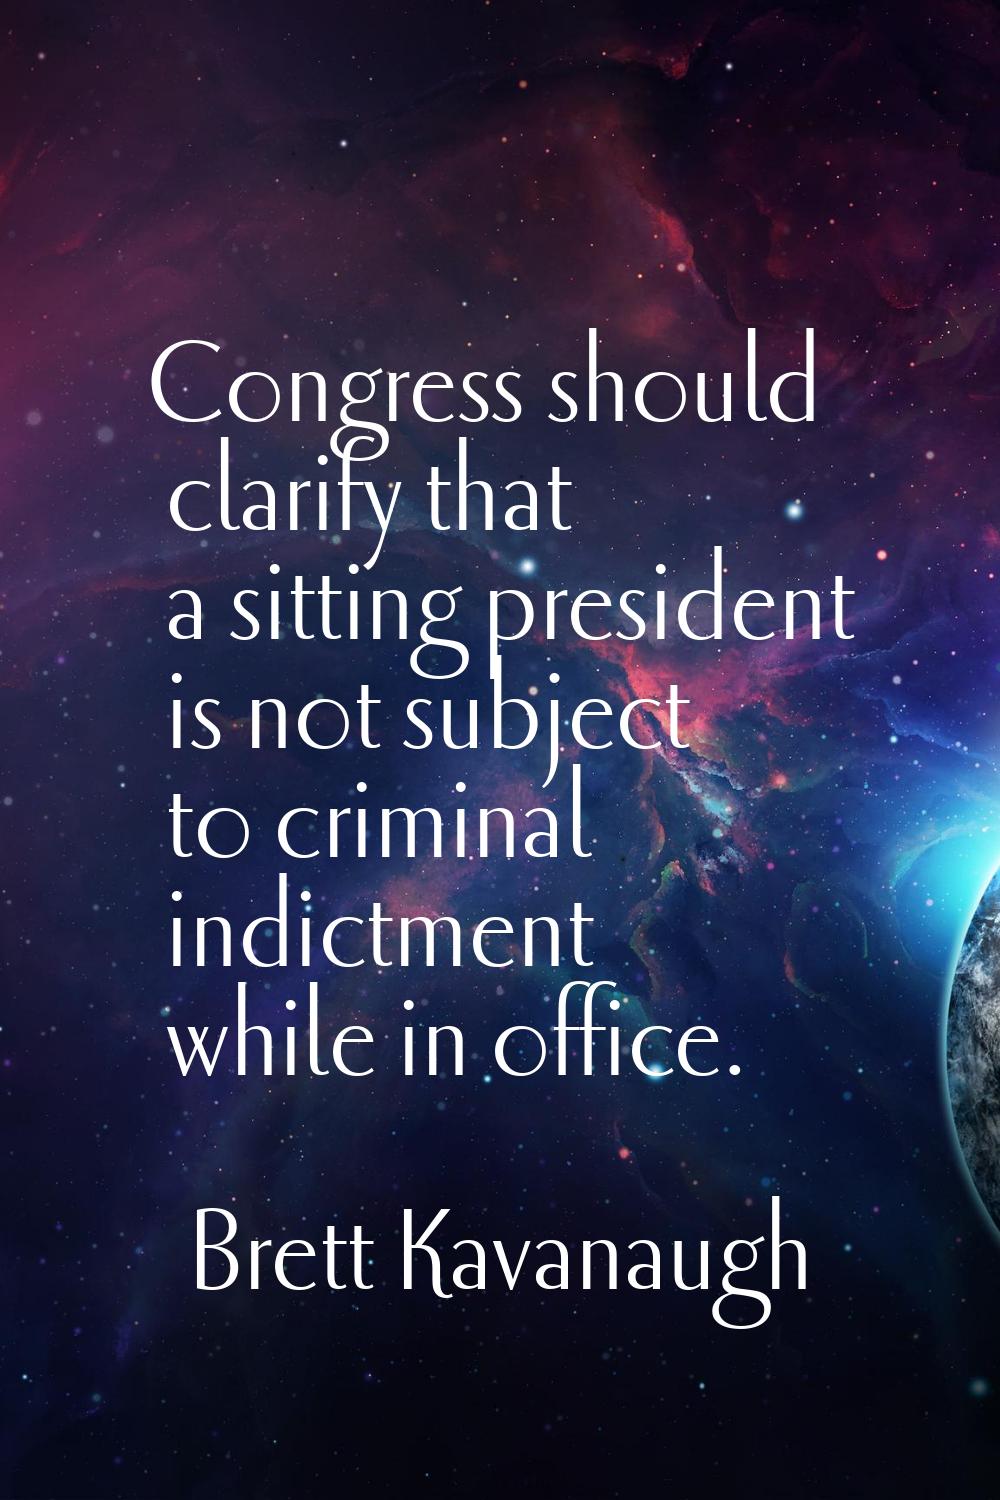 Congress should clarify that a sitting president is not subject to criminal indictment while in off